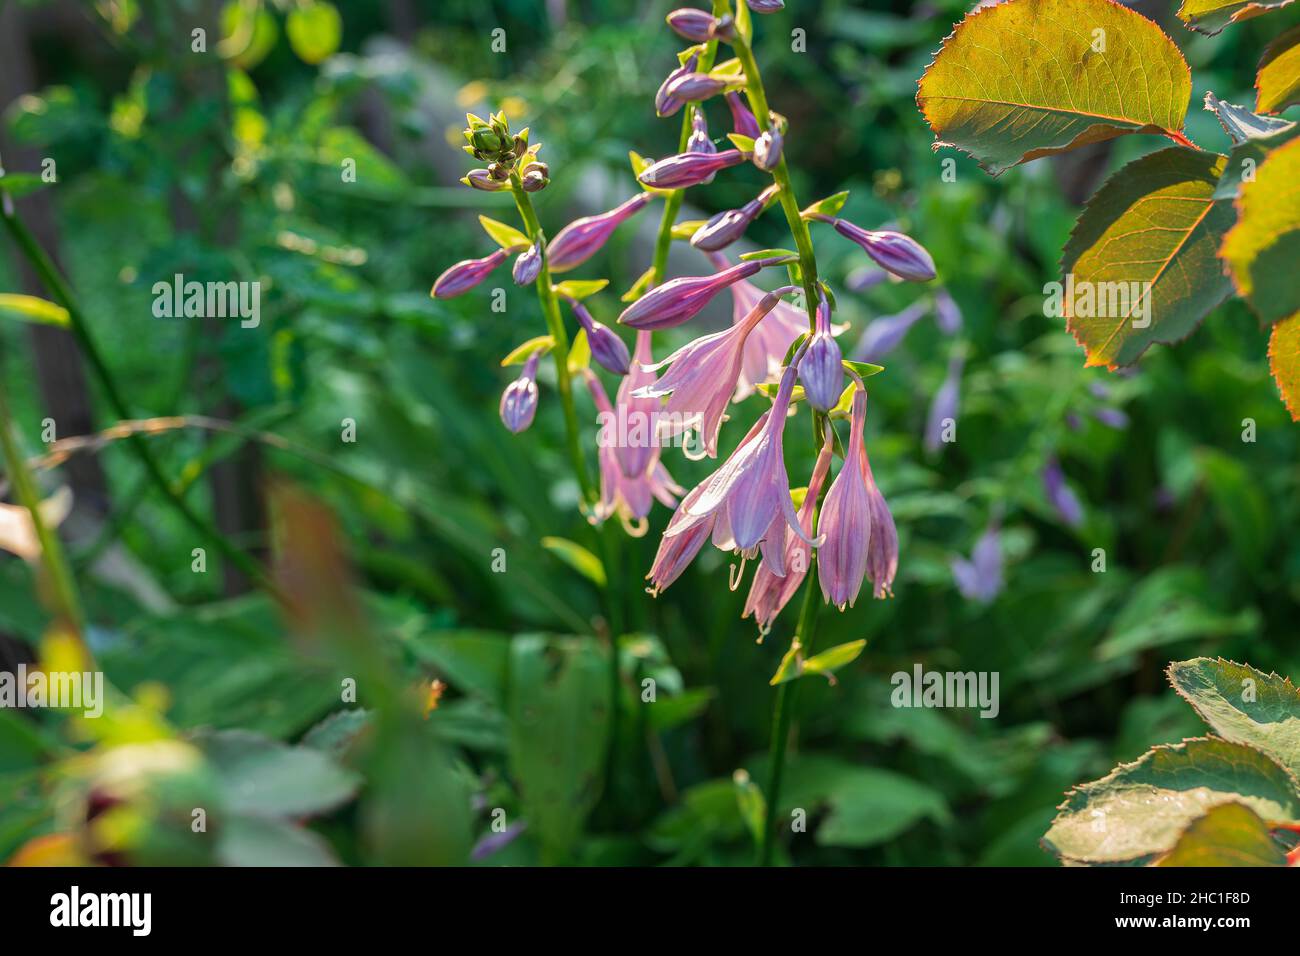 Inflorescence of lilac garden ornamental plant Hosta on blurred background of green garden. Stock Photo